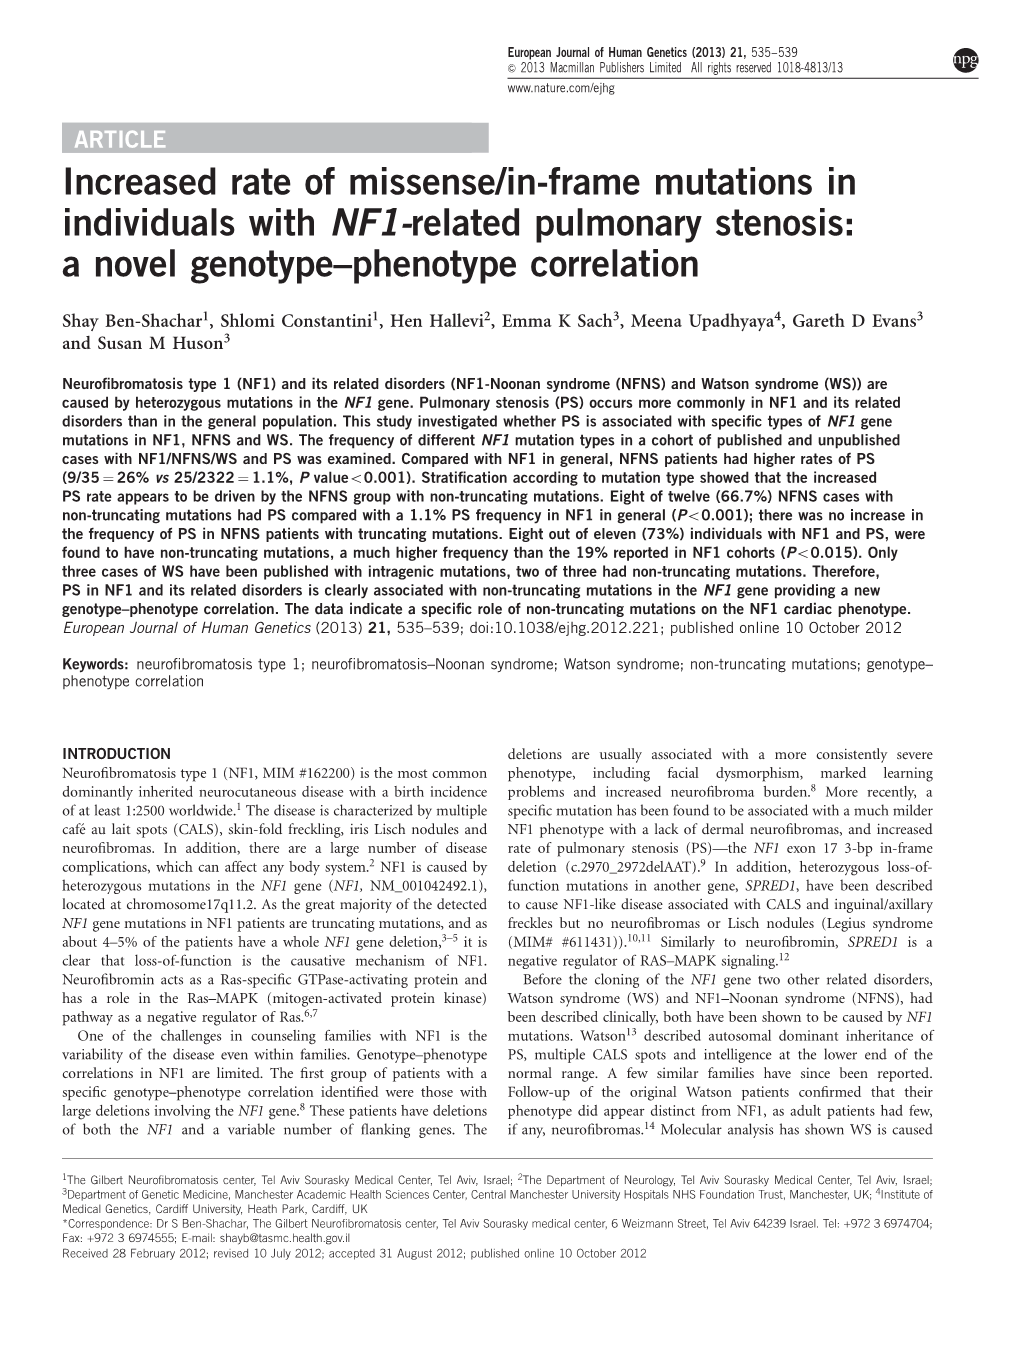 In-Frame Mutations in Individuals with NF1-Related Pulmonary Stenosis: a Novel Genotype–Phenotype Correlation